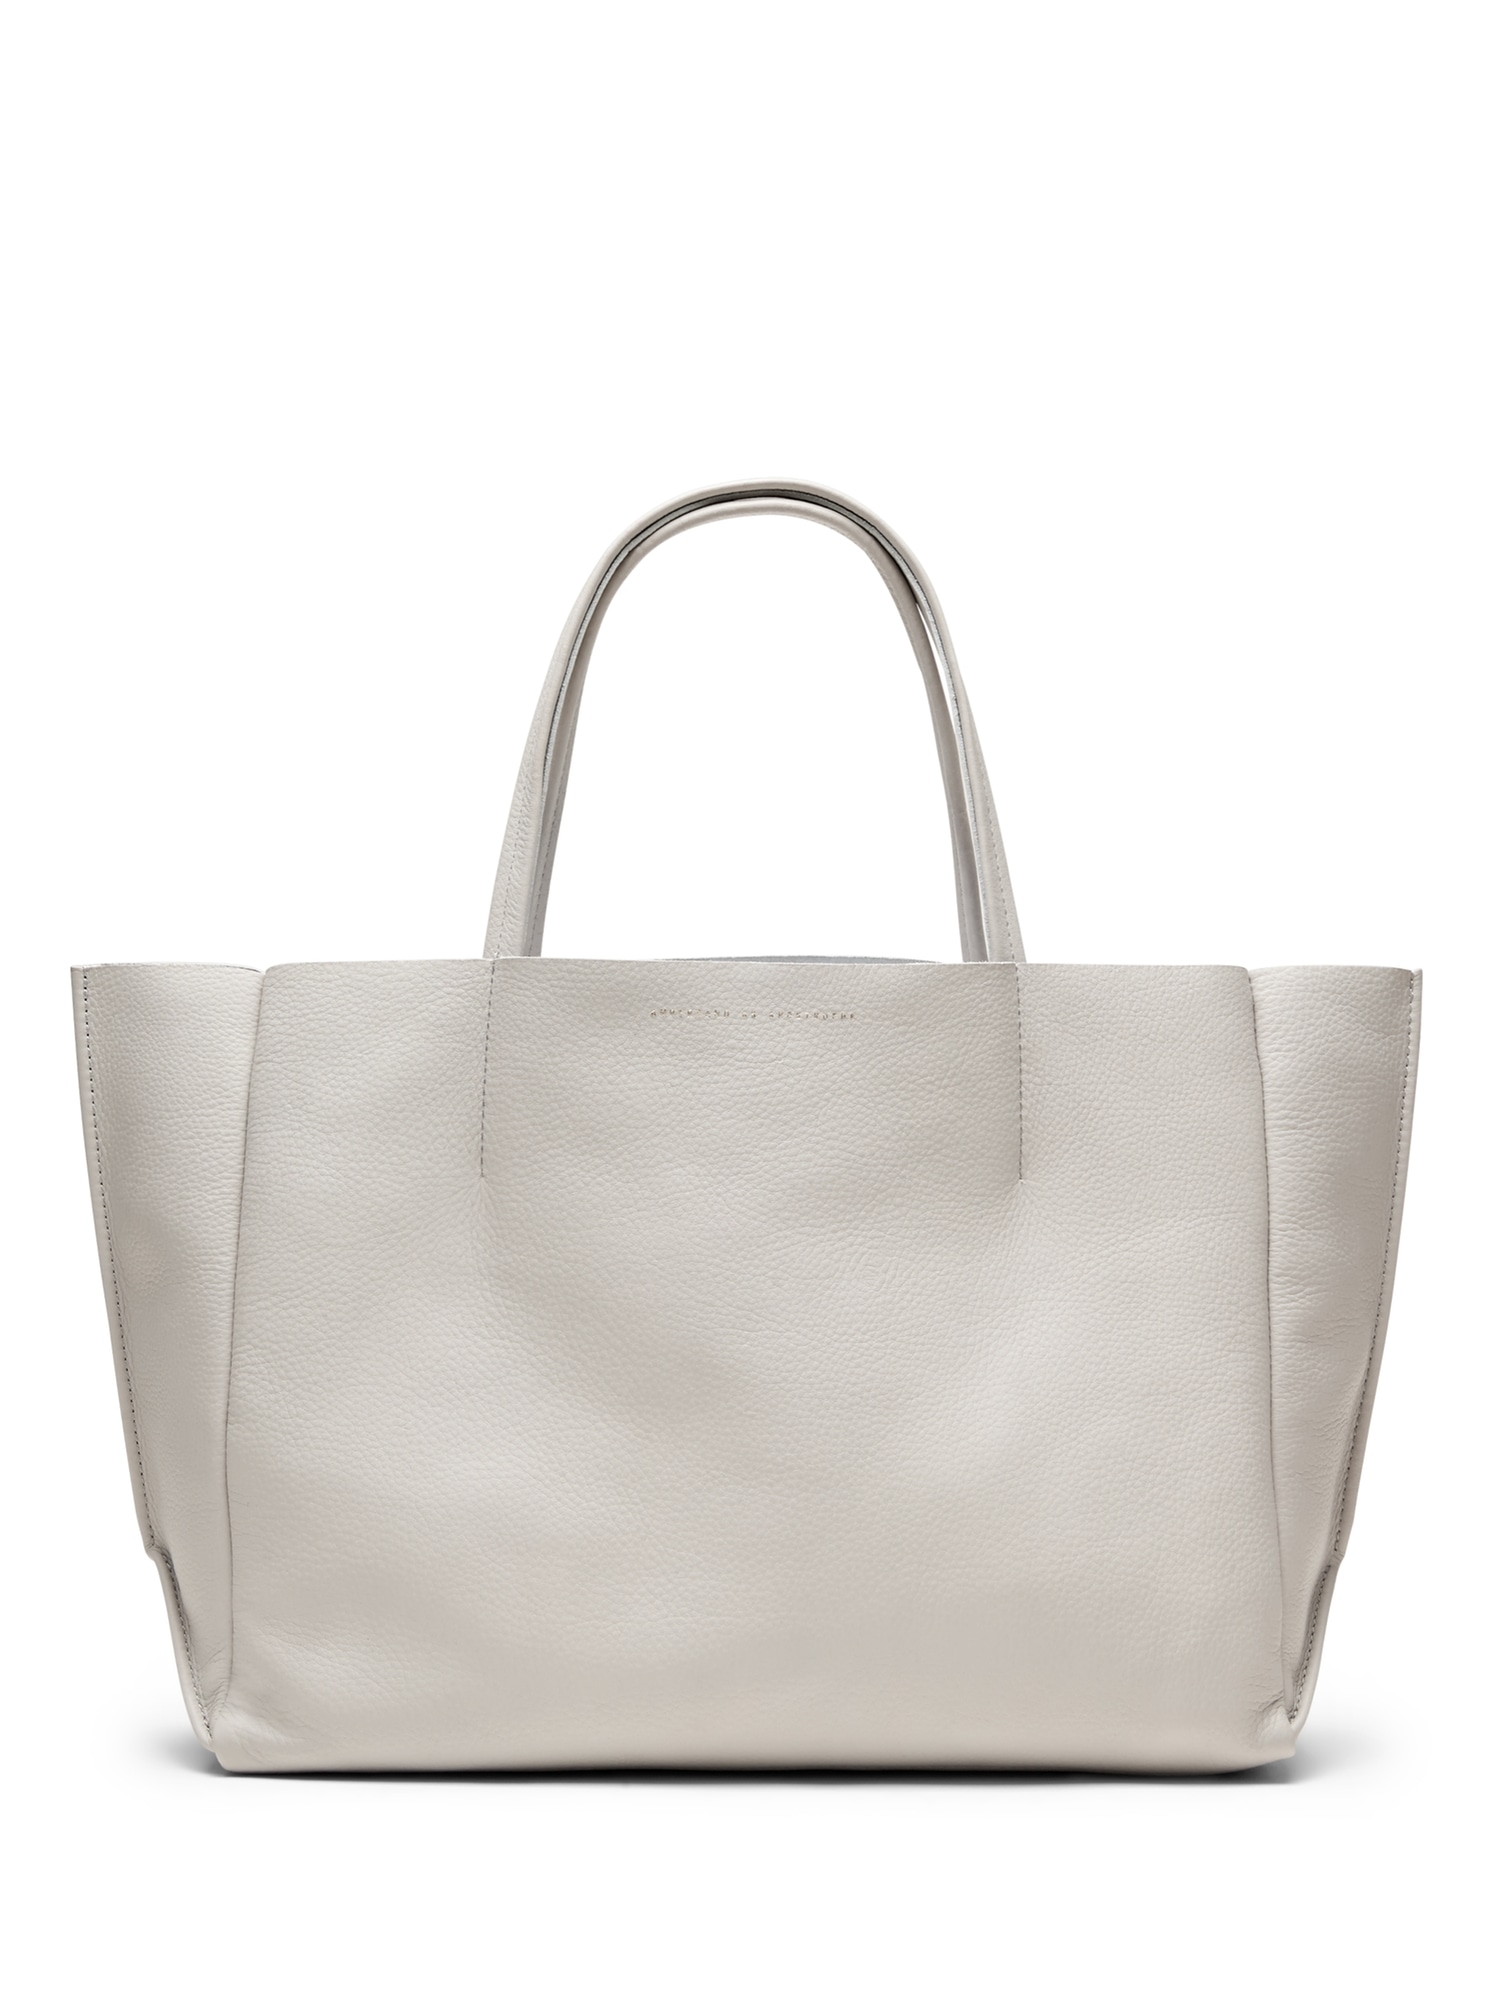 Ampersand as Apostrophe &#124 Soft Large Sideways Tote